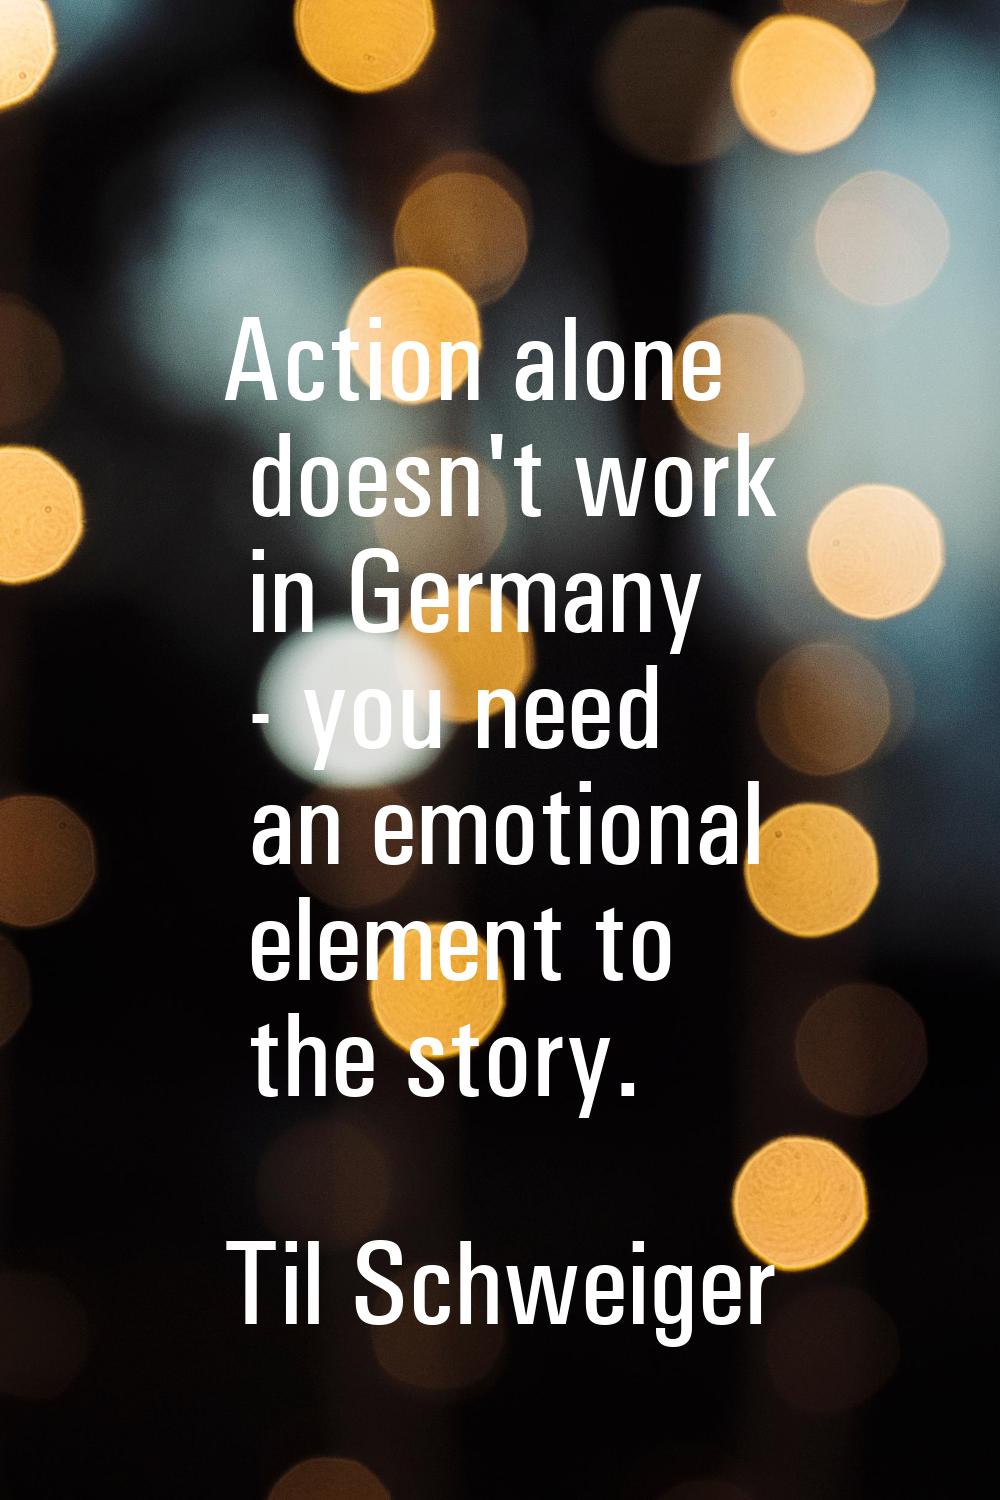 Action alone doesn't work in Germany - you need an emotional element to the story.